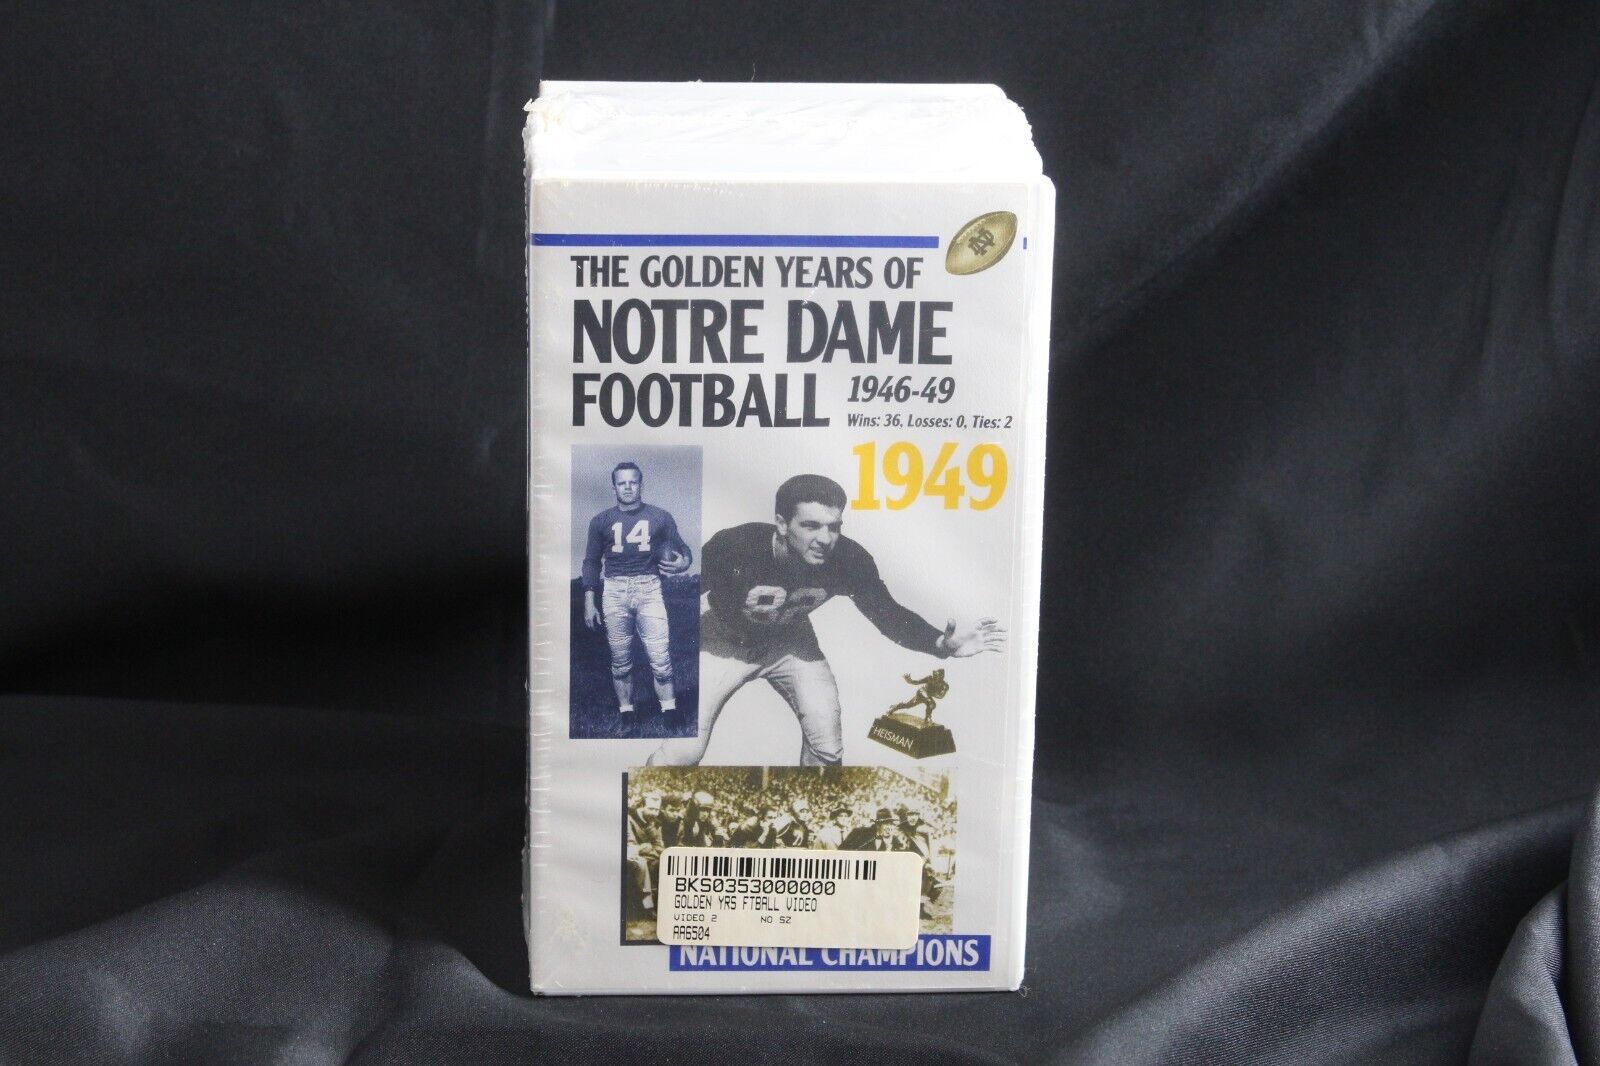 The Golden Years of Notre Dame Football 1946-49 VHS 4 Tapes Factory Sealed Без бренда - фотография #4